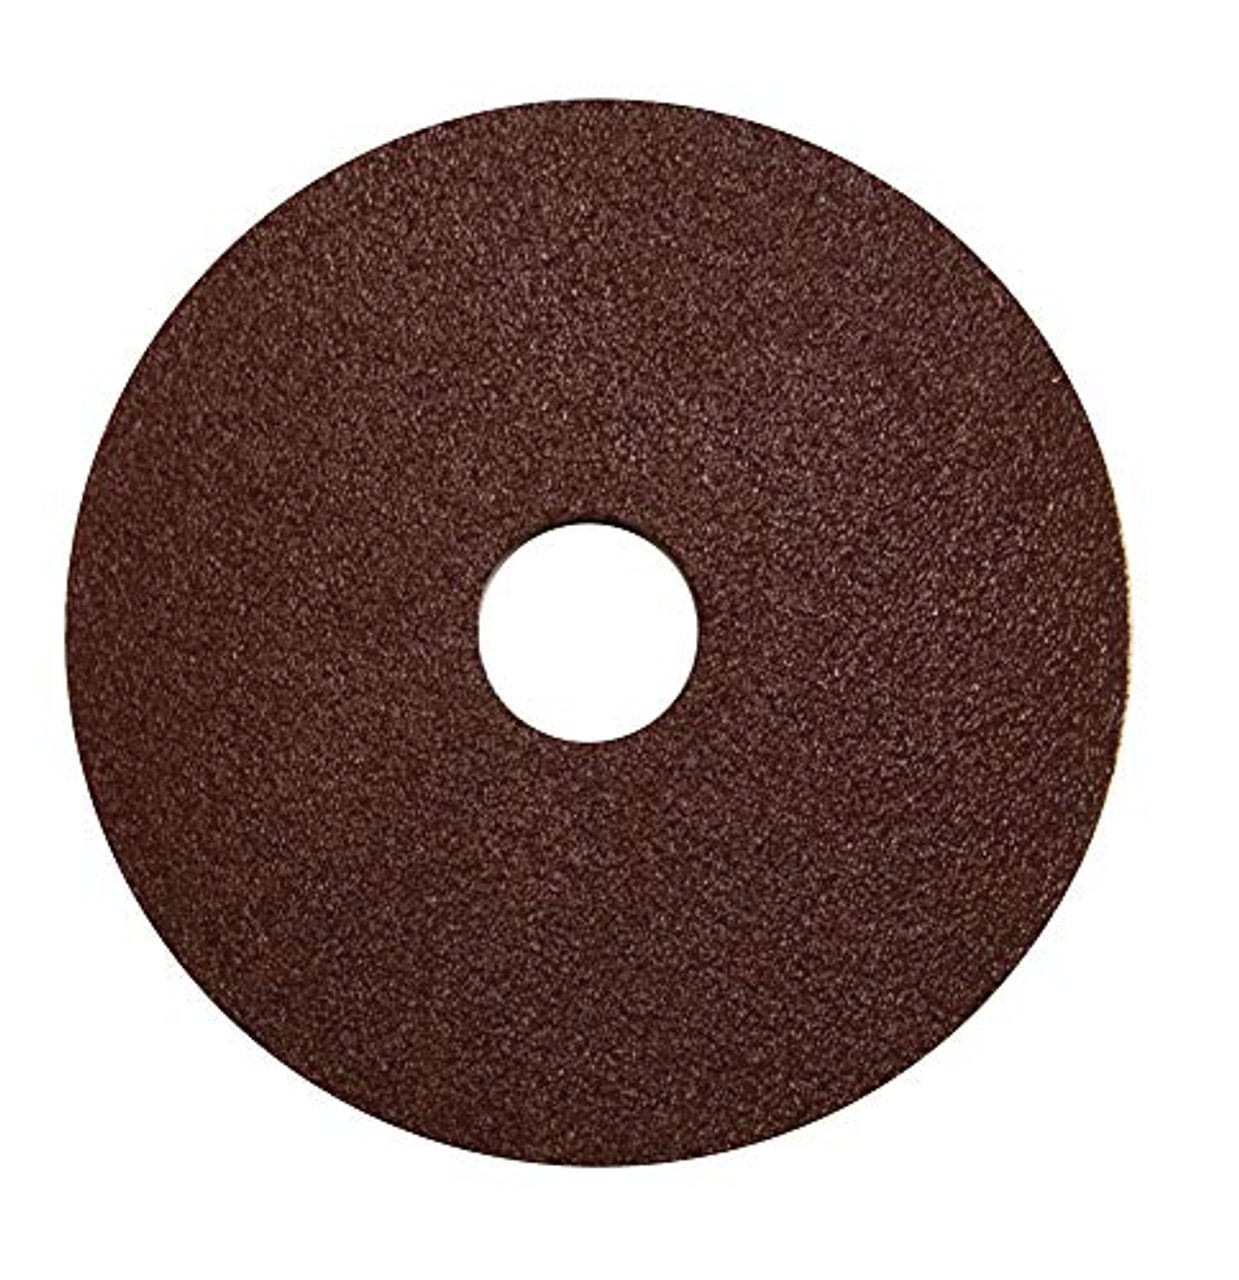 Century Drill & Tool (75004) Resin Fiber Disc, 4-1/2" by 50 Grit, 3 Pack